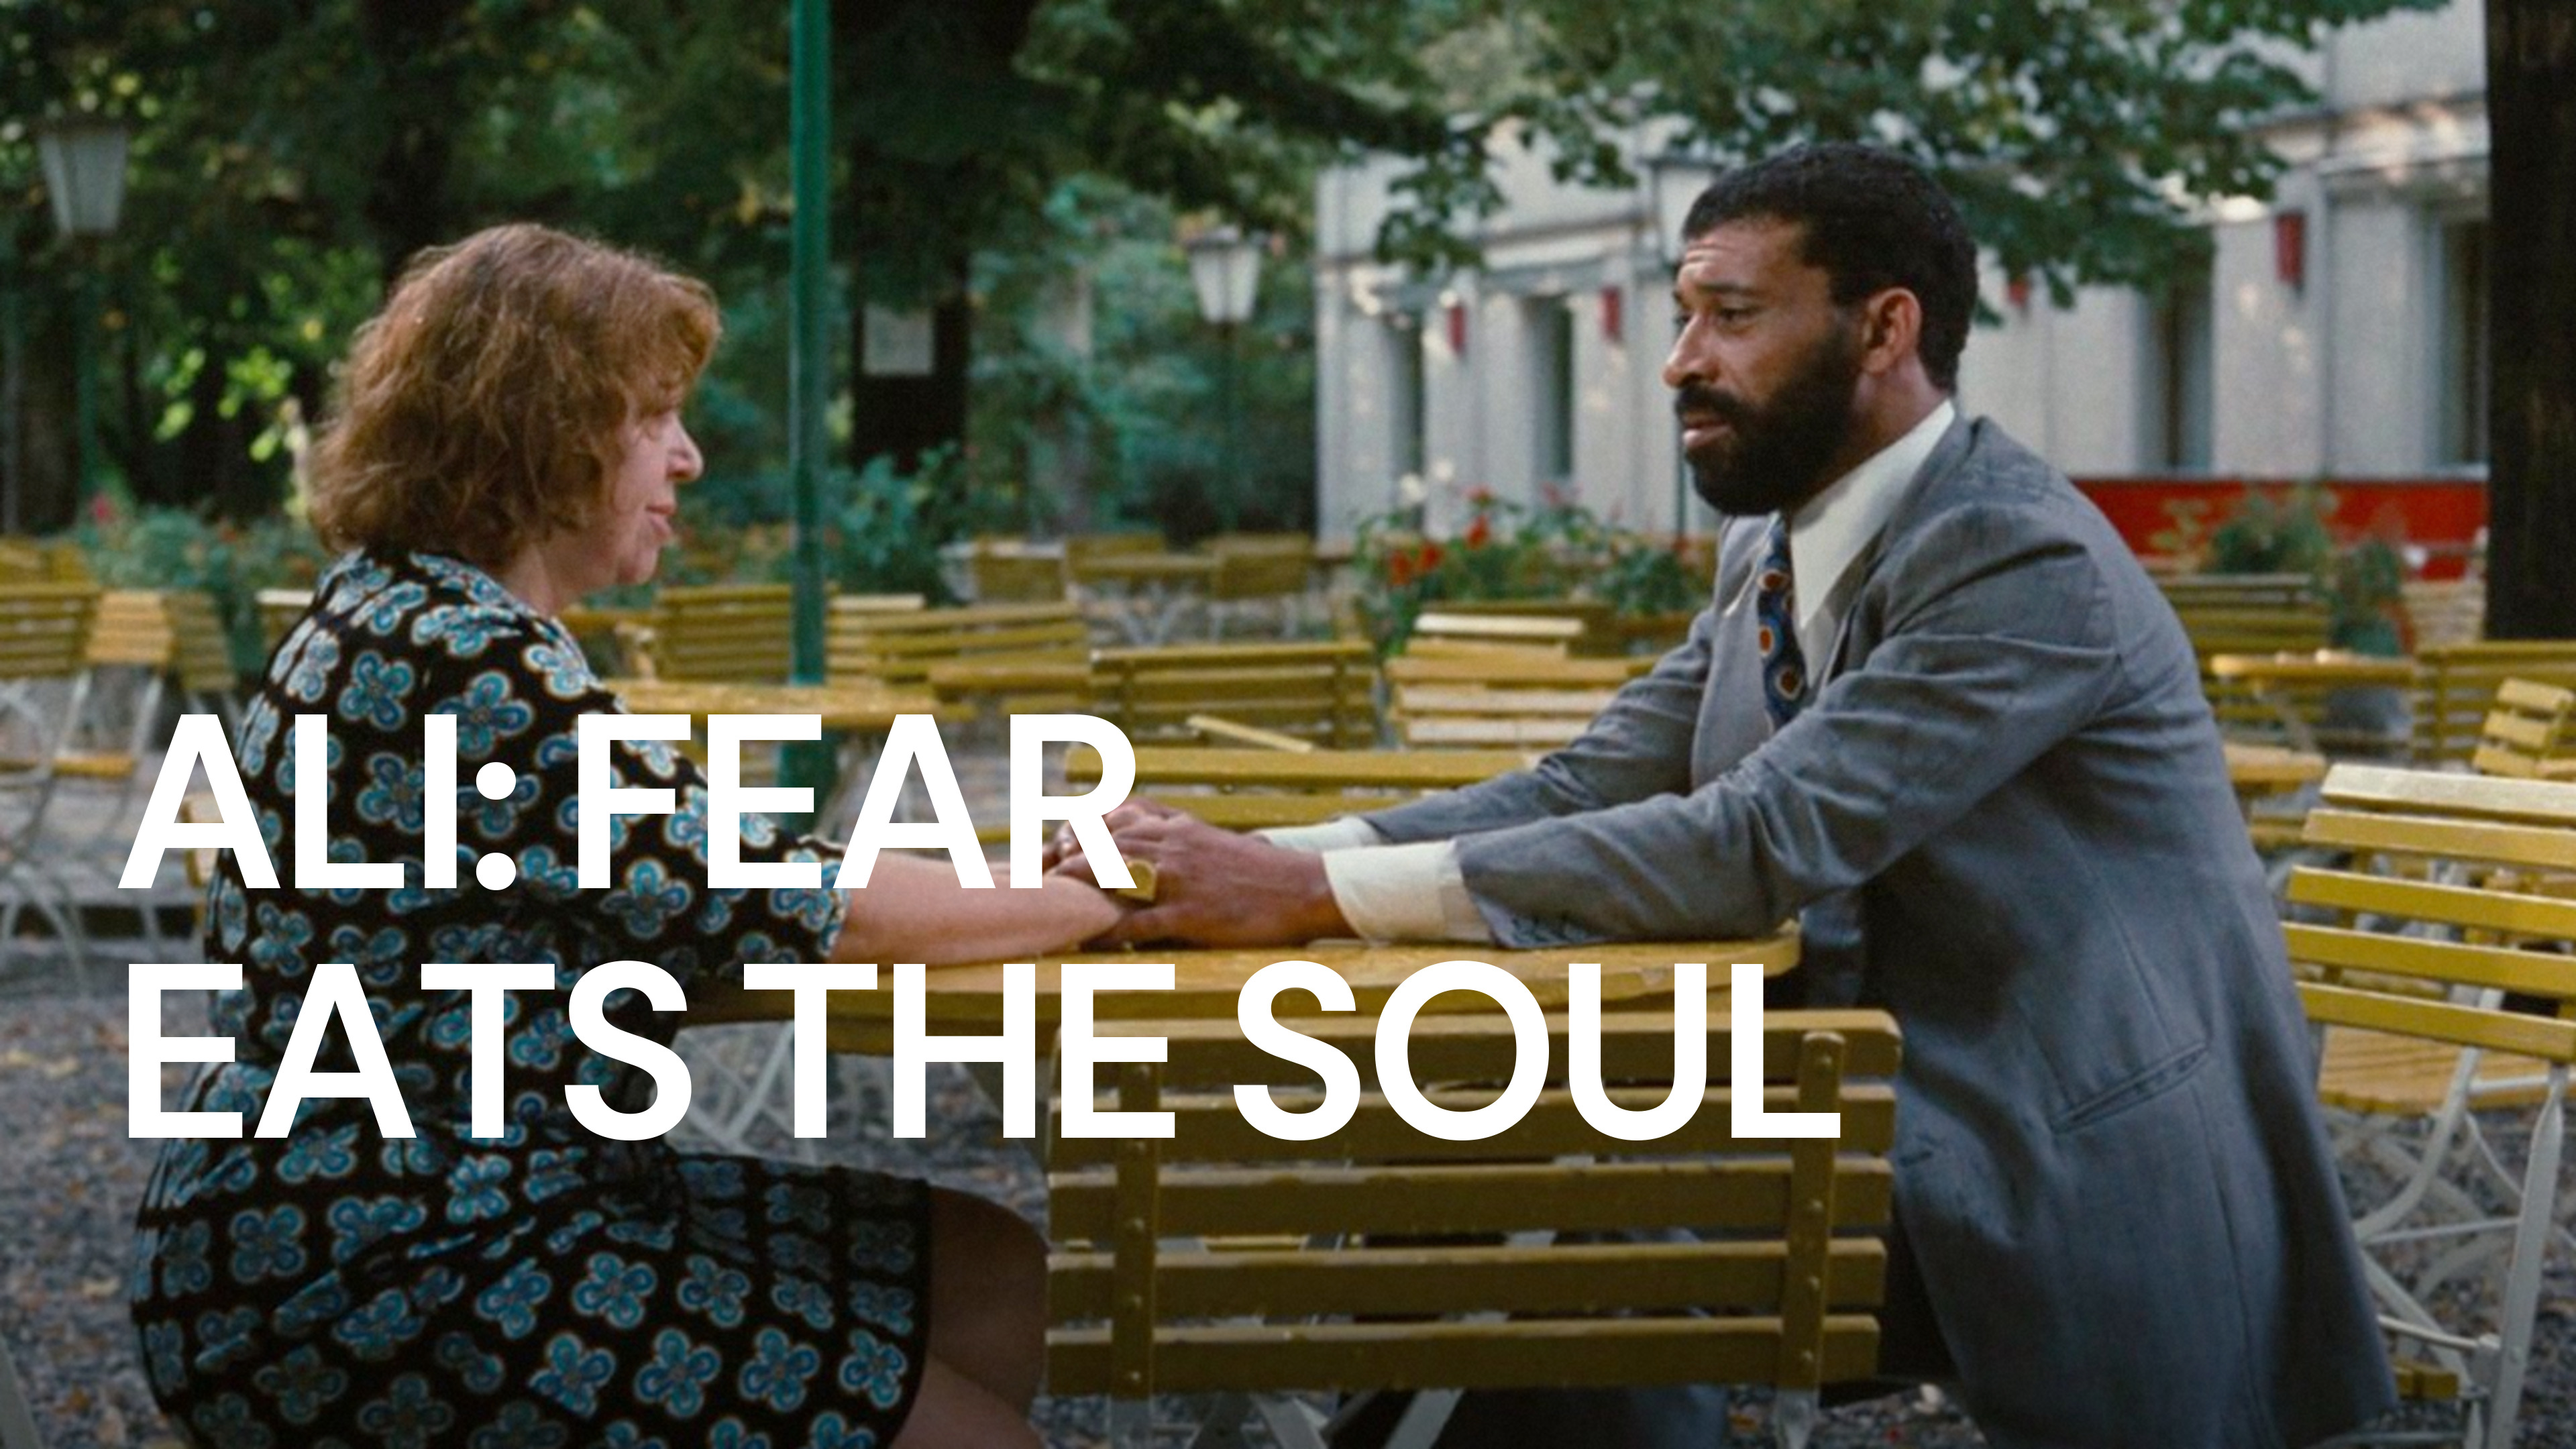 45-facts-about-the-movie-ali-fear-eats-the-soul